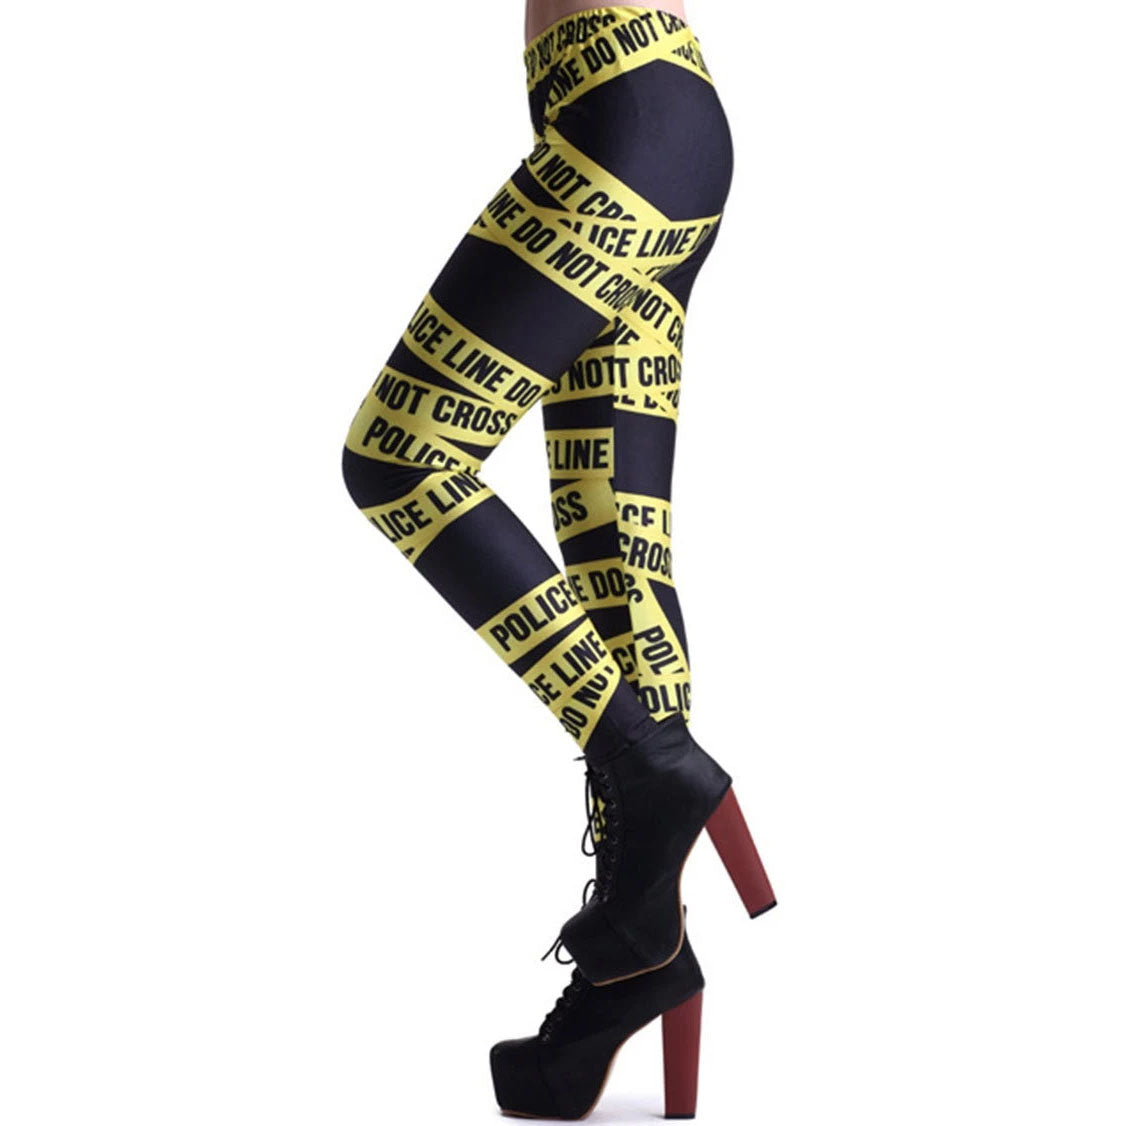 HEY ITS STREETCORNERFASHIONS WITH ITS NEWEST EDITION OF LADIES LEGGINGS FOR  DA LADIES LINE OF STREETCORNERFASHIONS AND AFTER A FEW ALTERA